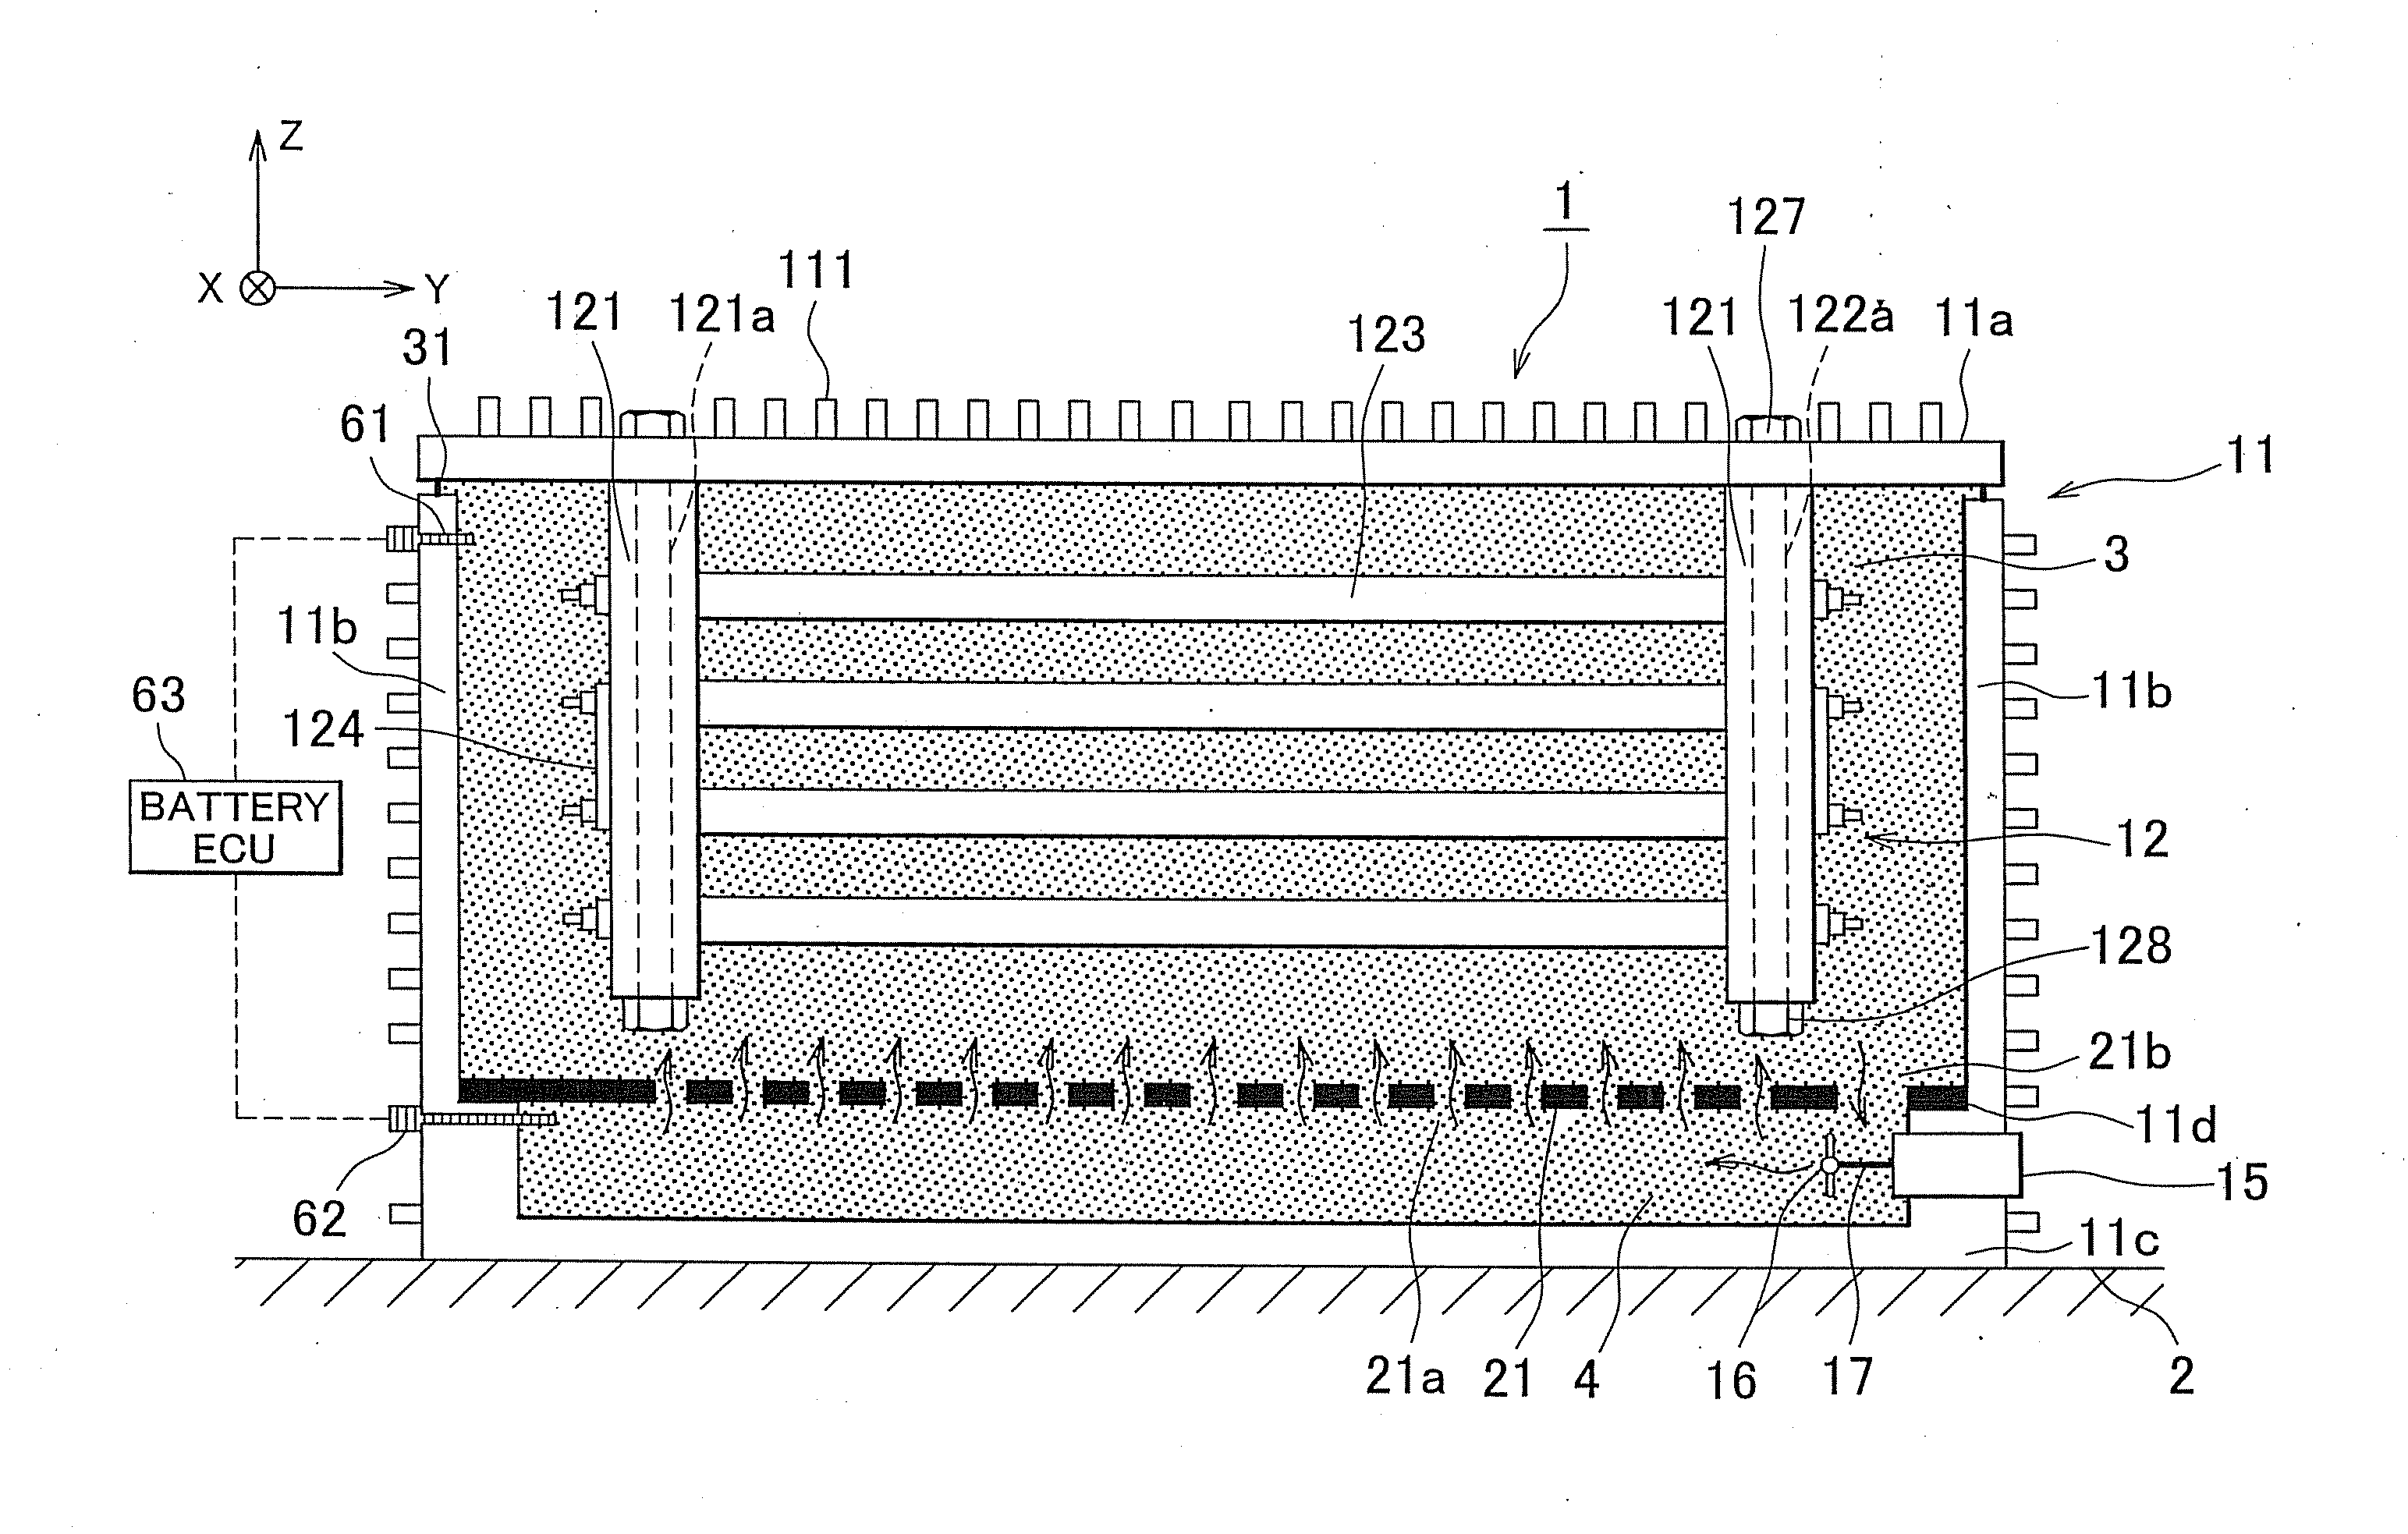 Power supply apparatus for a vehicle